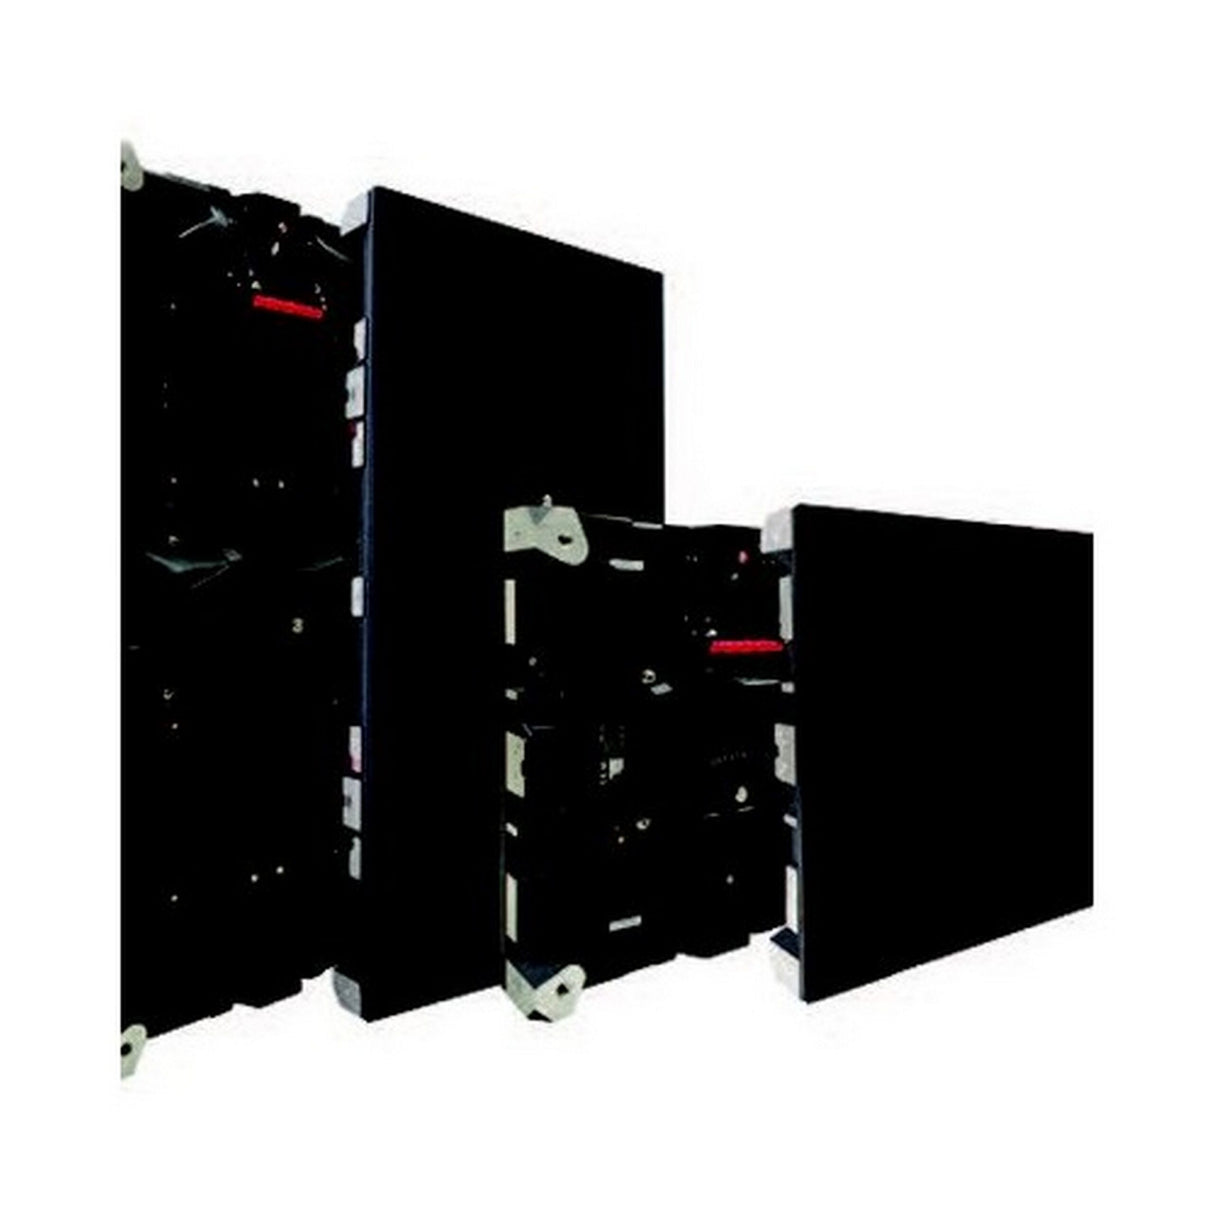 Neoti D59O500X500 Duo Series 5.9 Outdoor LED Panel